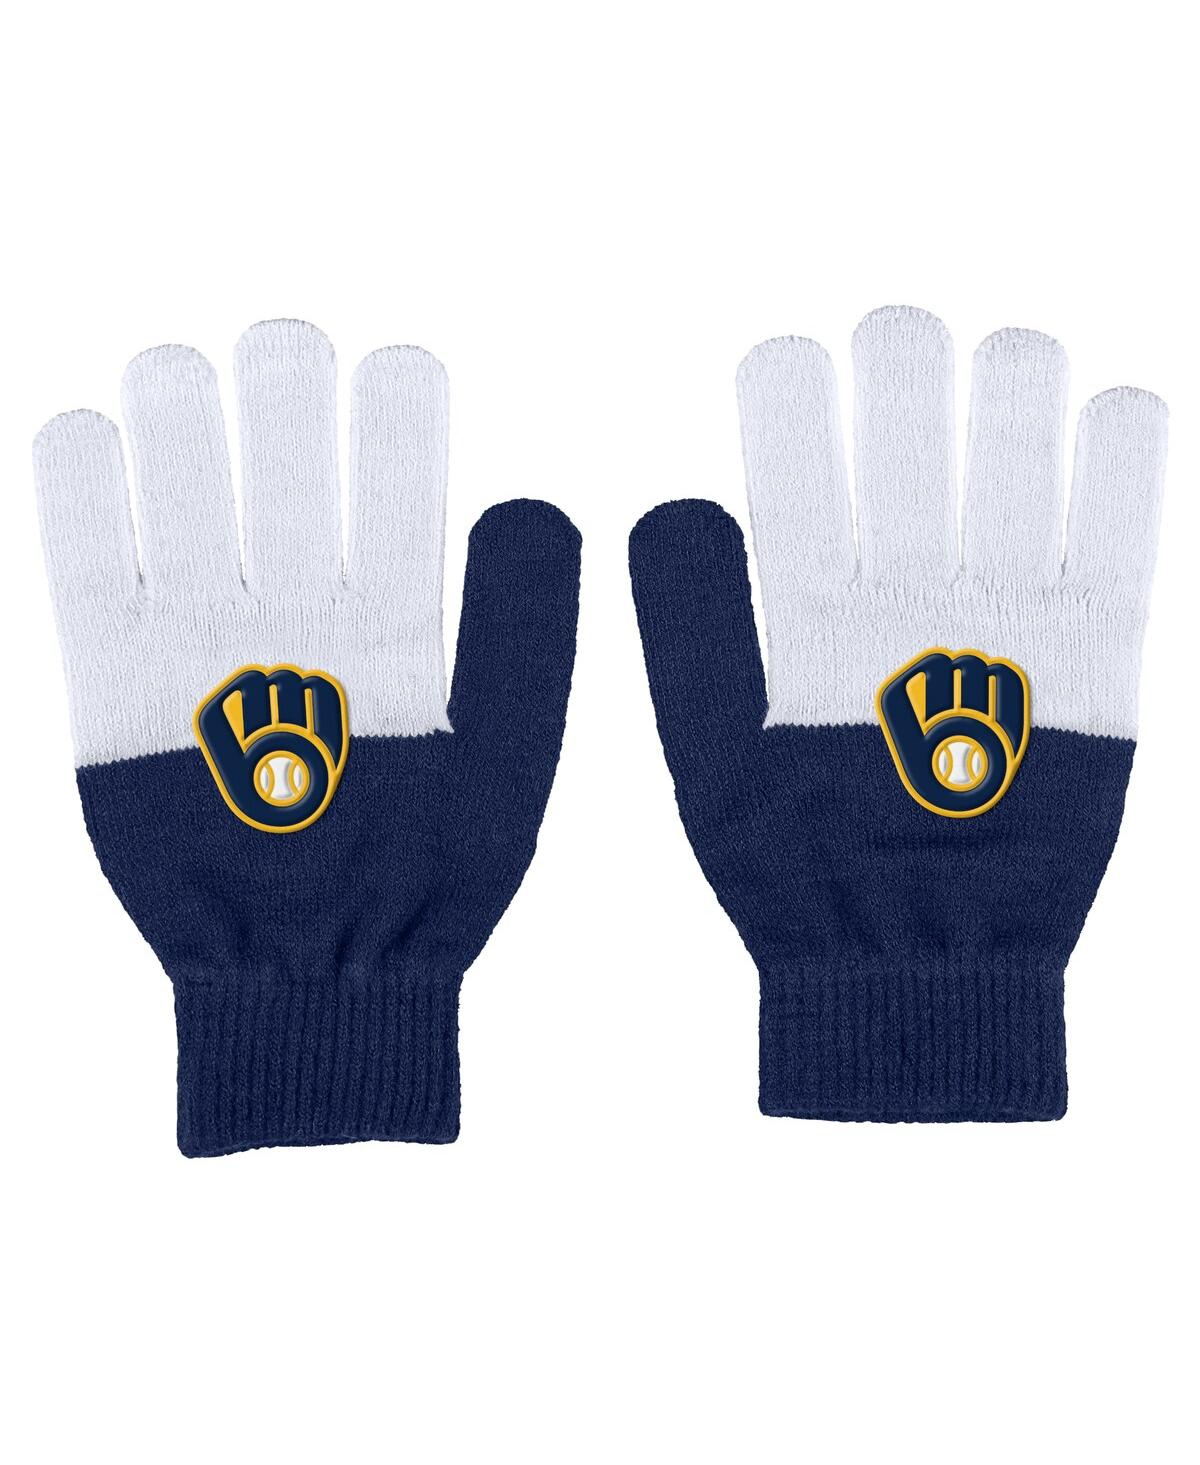 Women's Wear by Erin Andrews Milwaukee Brewers Color-Block Gloves - Multi